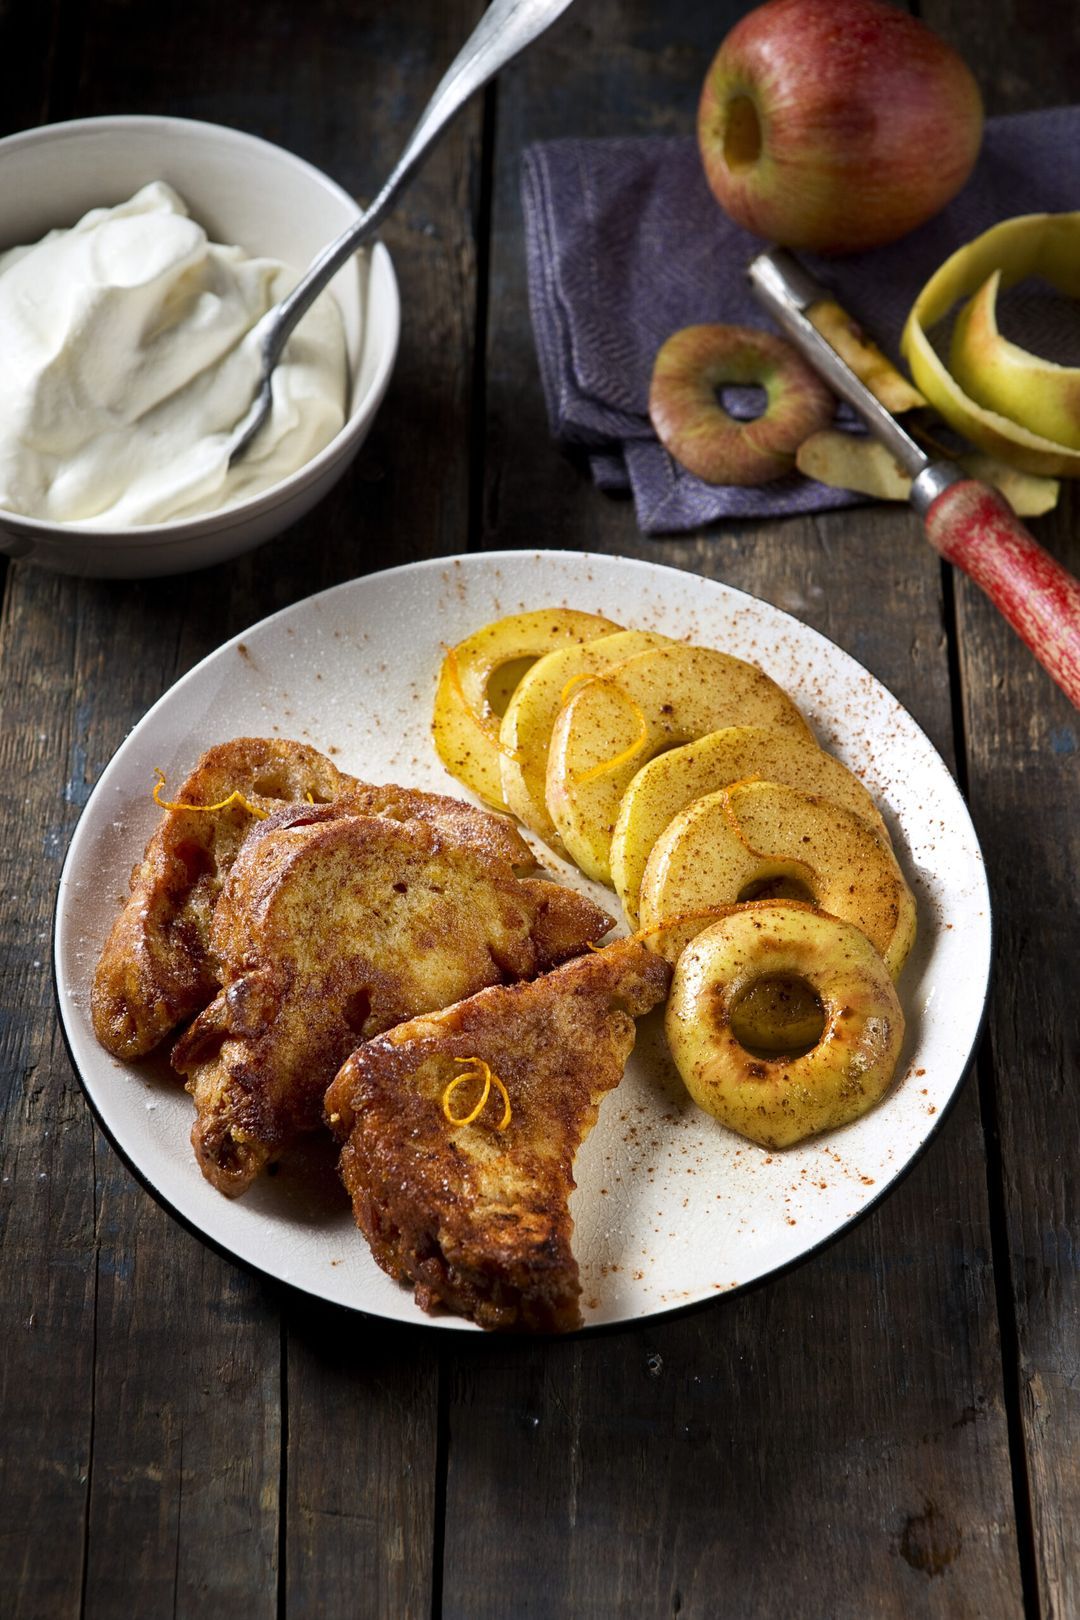 Sugarloaf French toast with baked apple